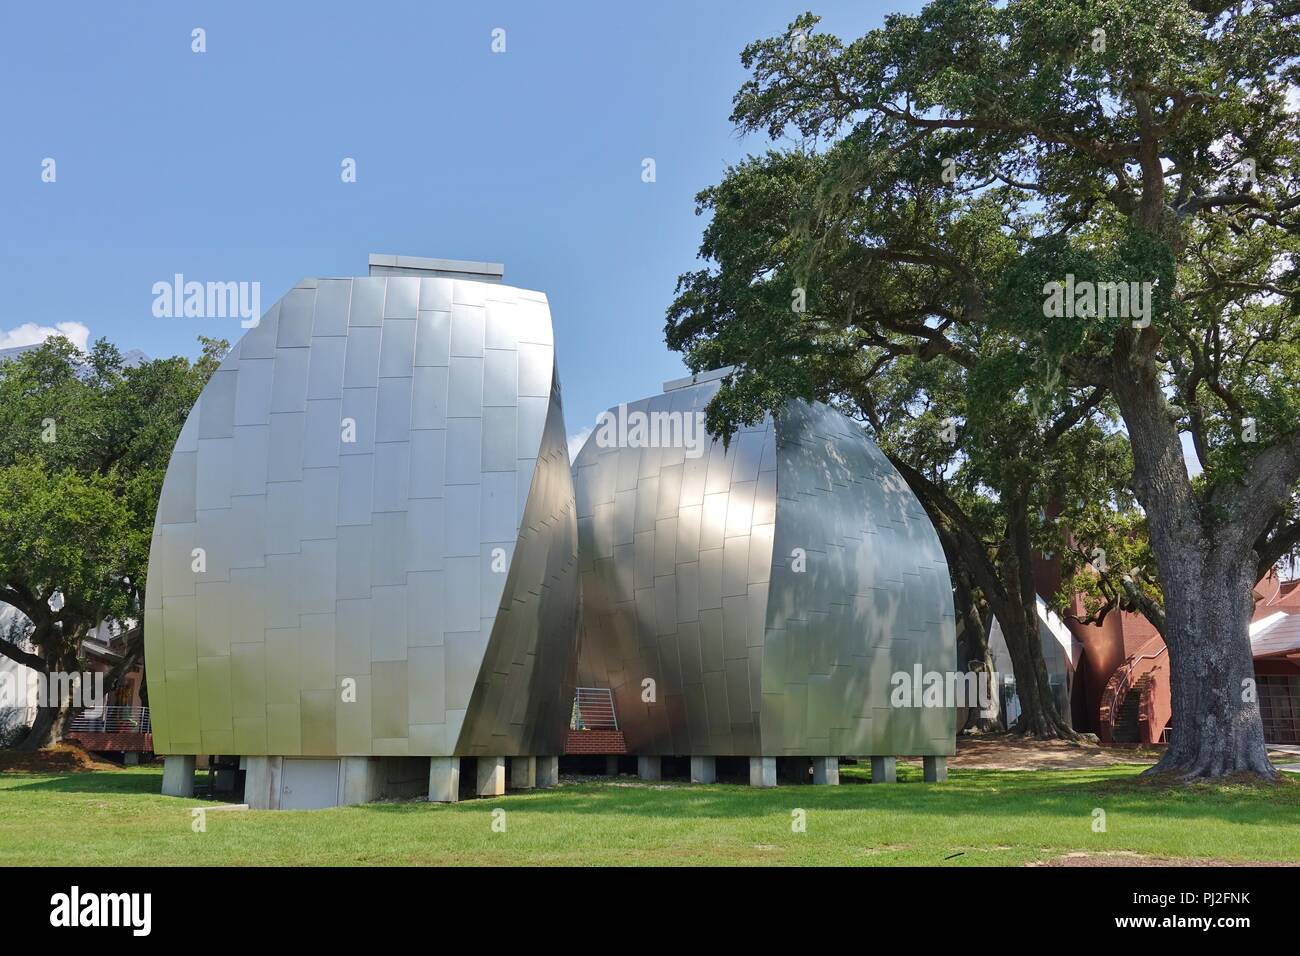 BILOXI, MS - View of the landmark Ohr-O'Keefe Museum Of Art, dedicated to the Mad Potter of Biloxi, in Biloxi, Mississippi. Stock Photo